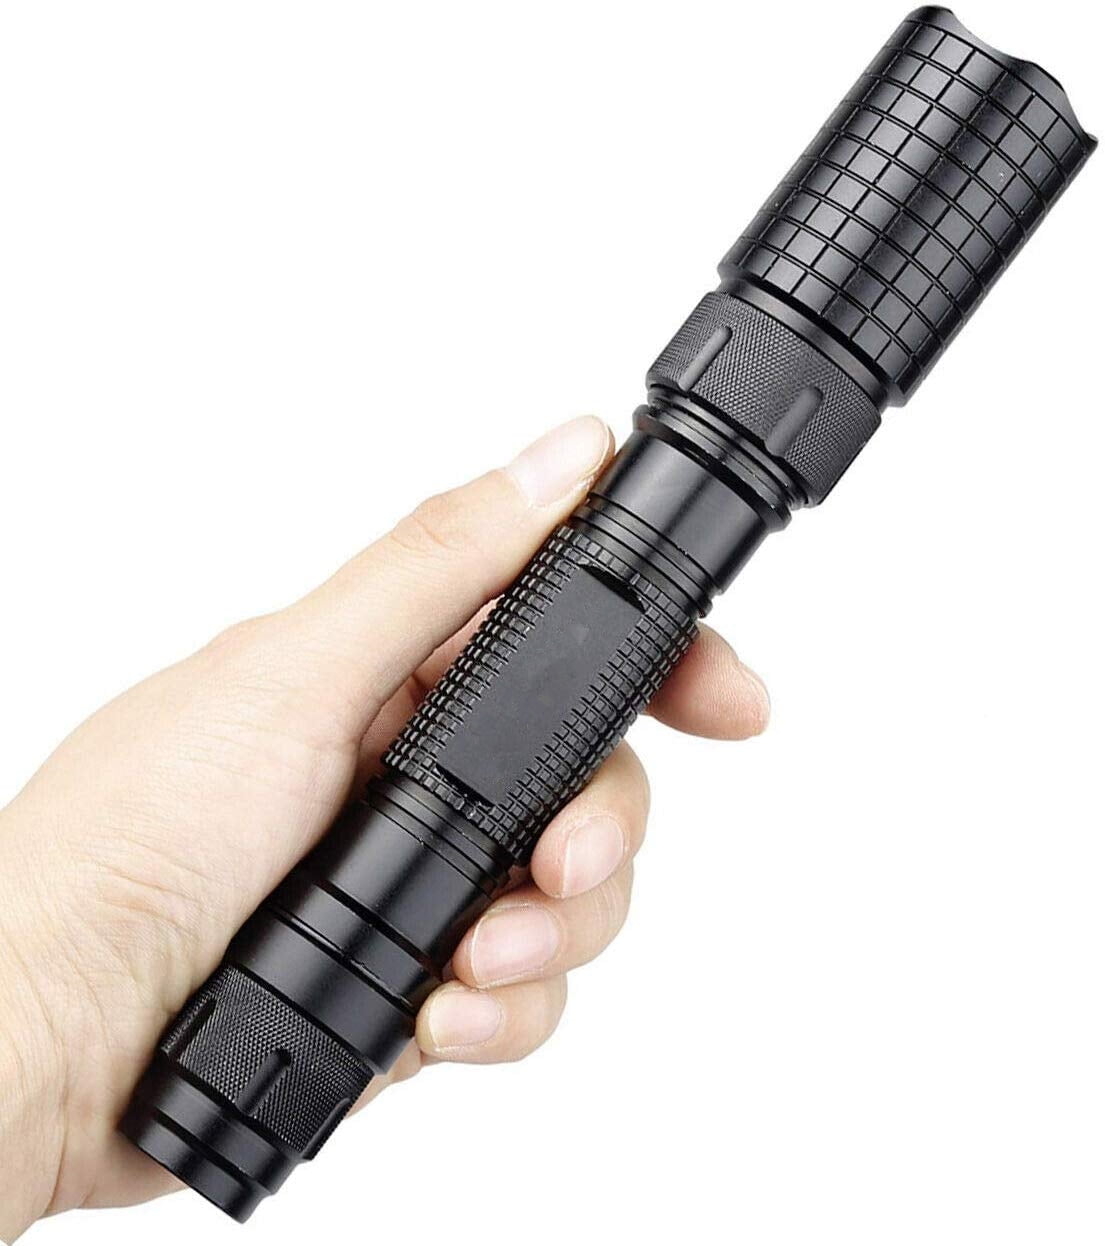 Zoomable 300000Lumens 5-Mode High Power T6 LED Flashlight Torch 18650 Charger US 